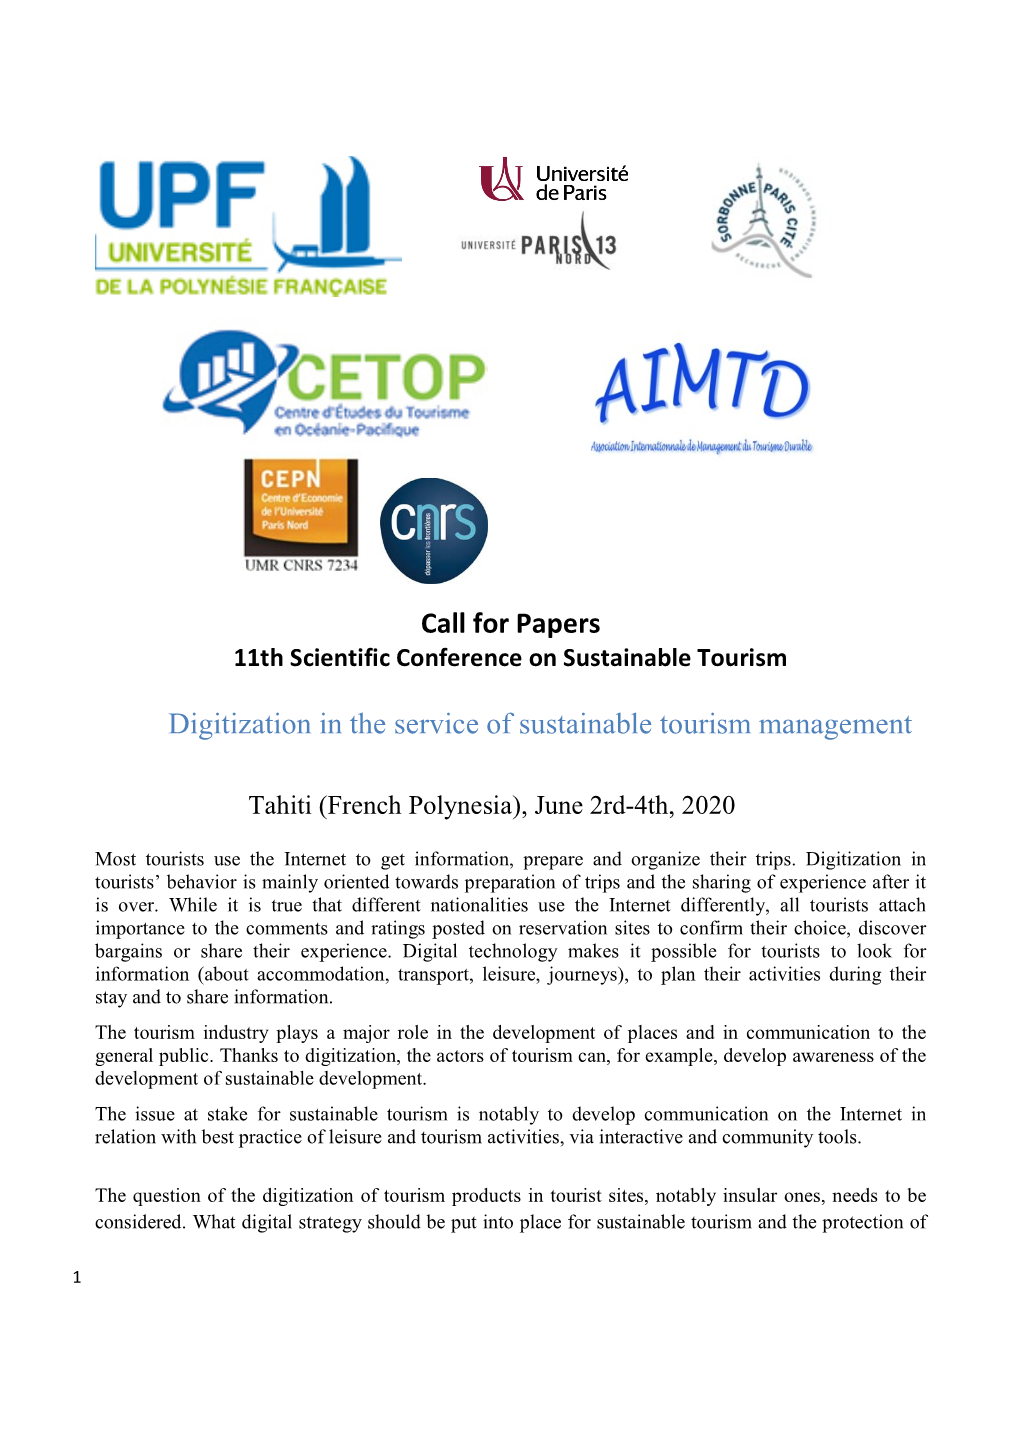 Call for Papers Digitization in the Service of Sustainable Tourism Management